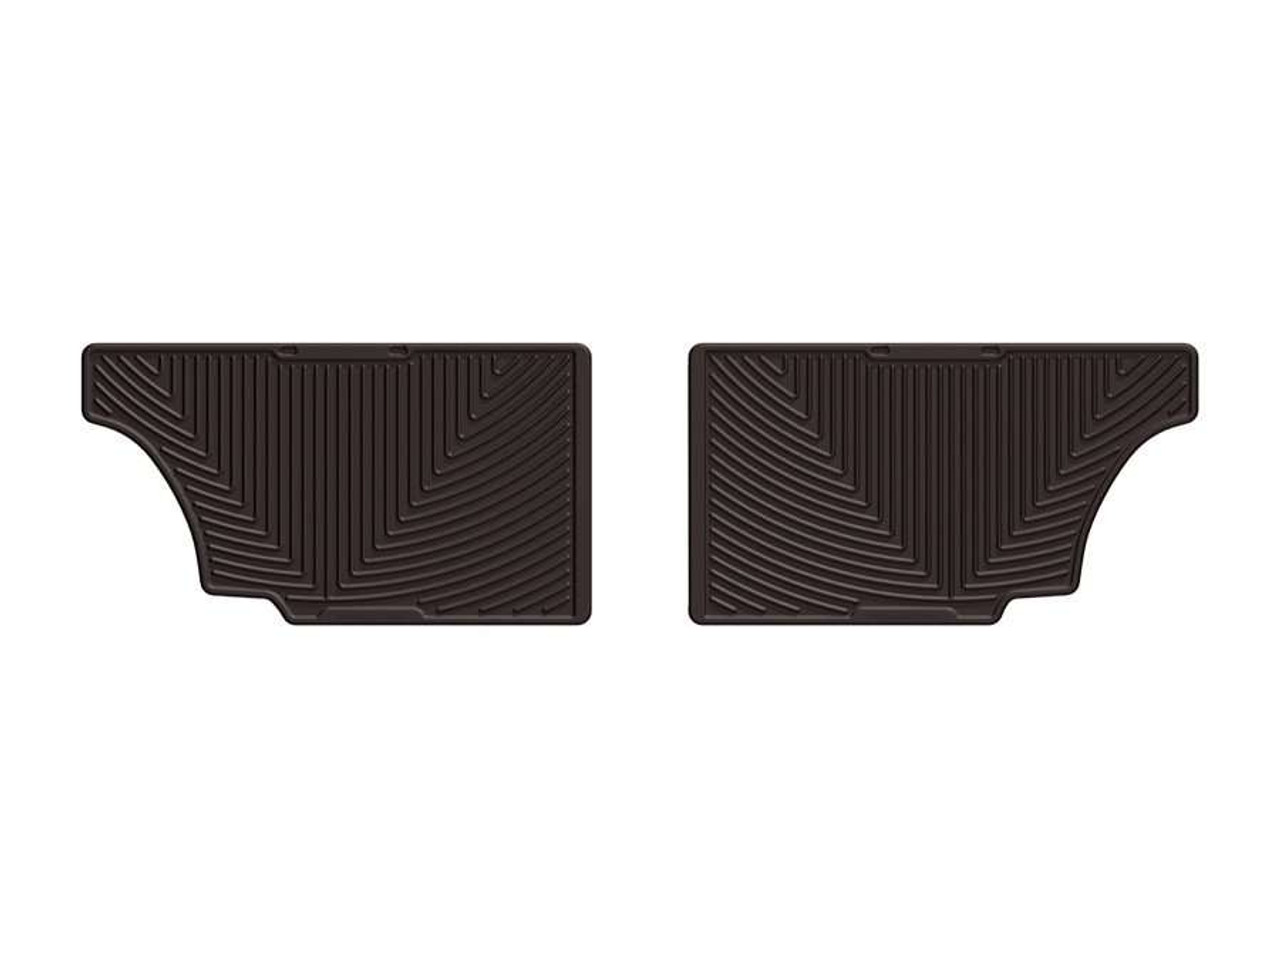 https://cdn11.bigcommerce.com/s-1gfd17pa/images/stencil/1280x1280/products/626035/1428146/WeatherTech-W480CO-Cocoa-Rear-All-Weather-Floor-Mats-Ford-Expedition-Lincoln-Navigator-BHTJ-W480CO-BB-Wheels_1074347__95293.1666338348.jpg?c=2